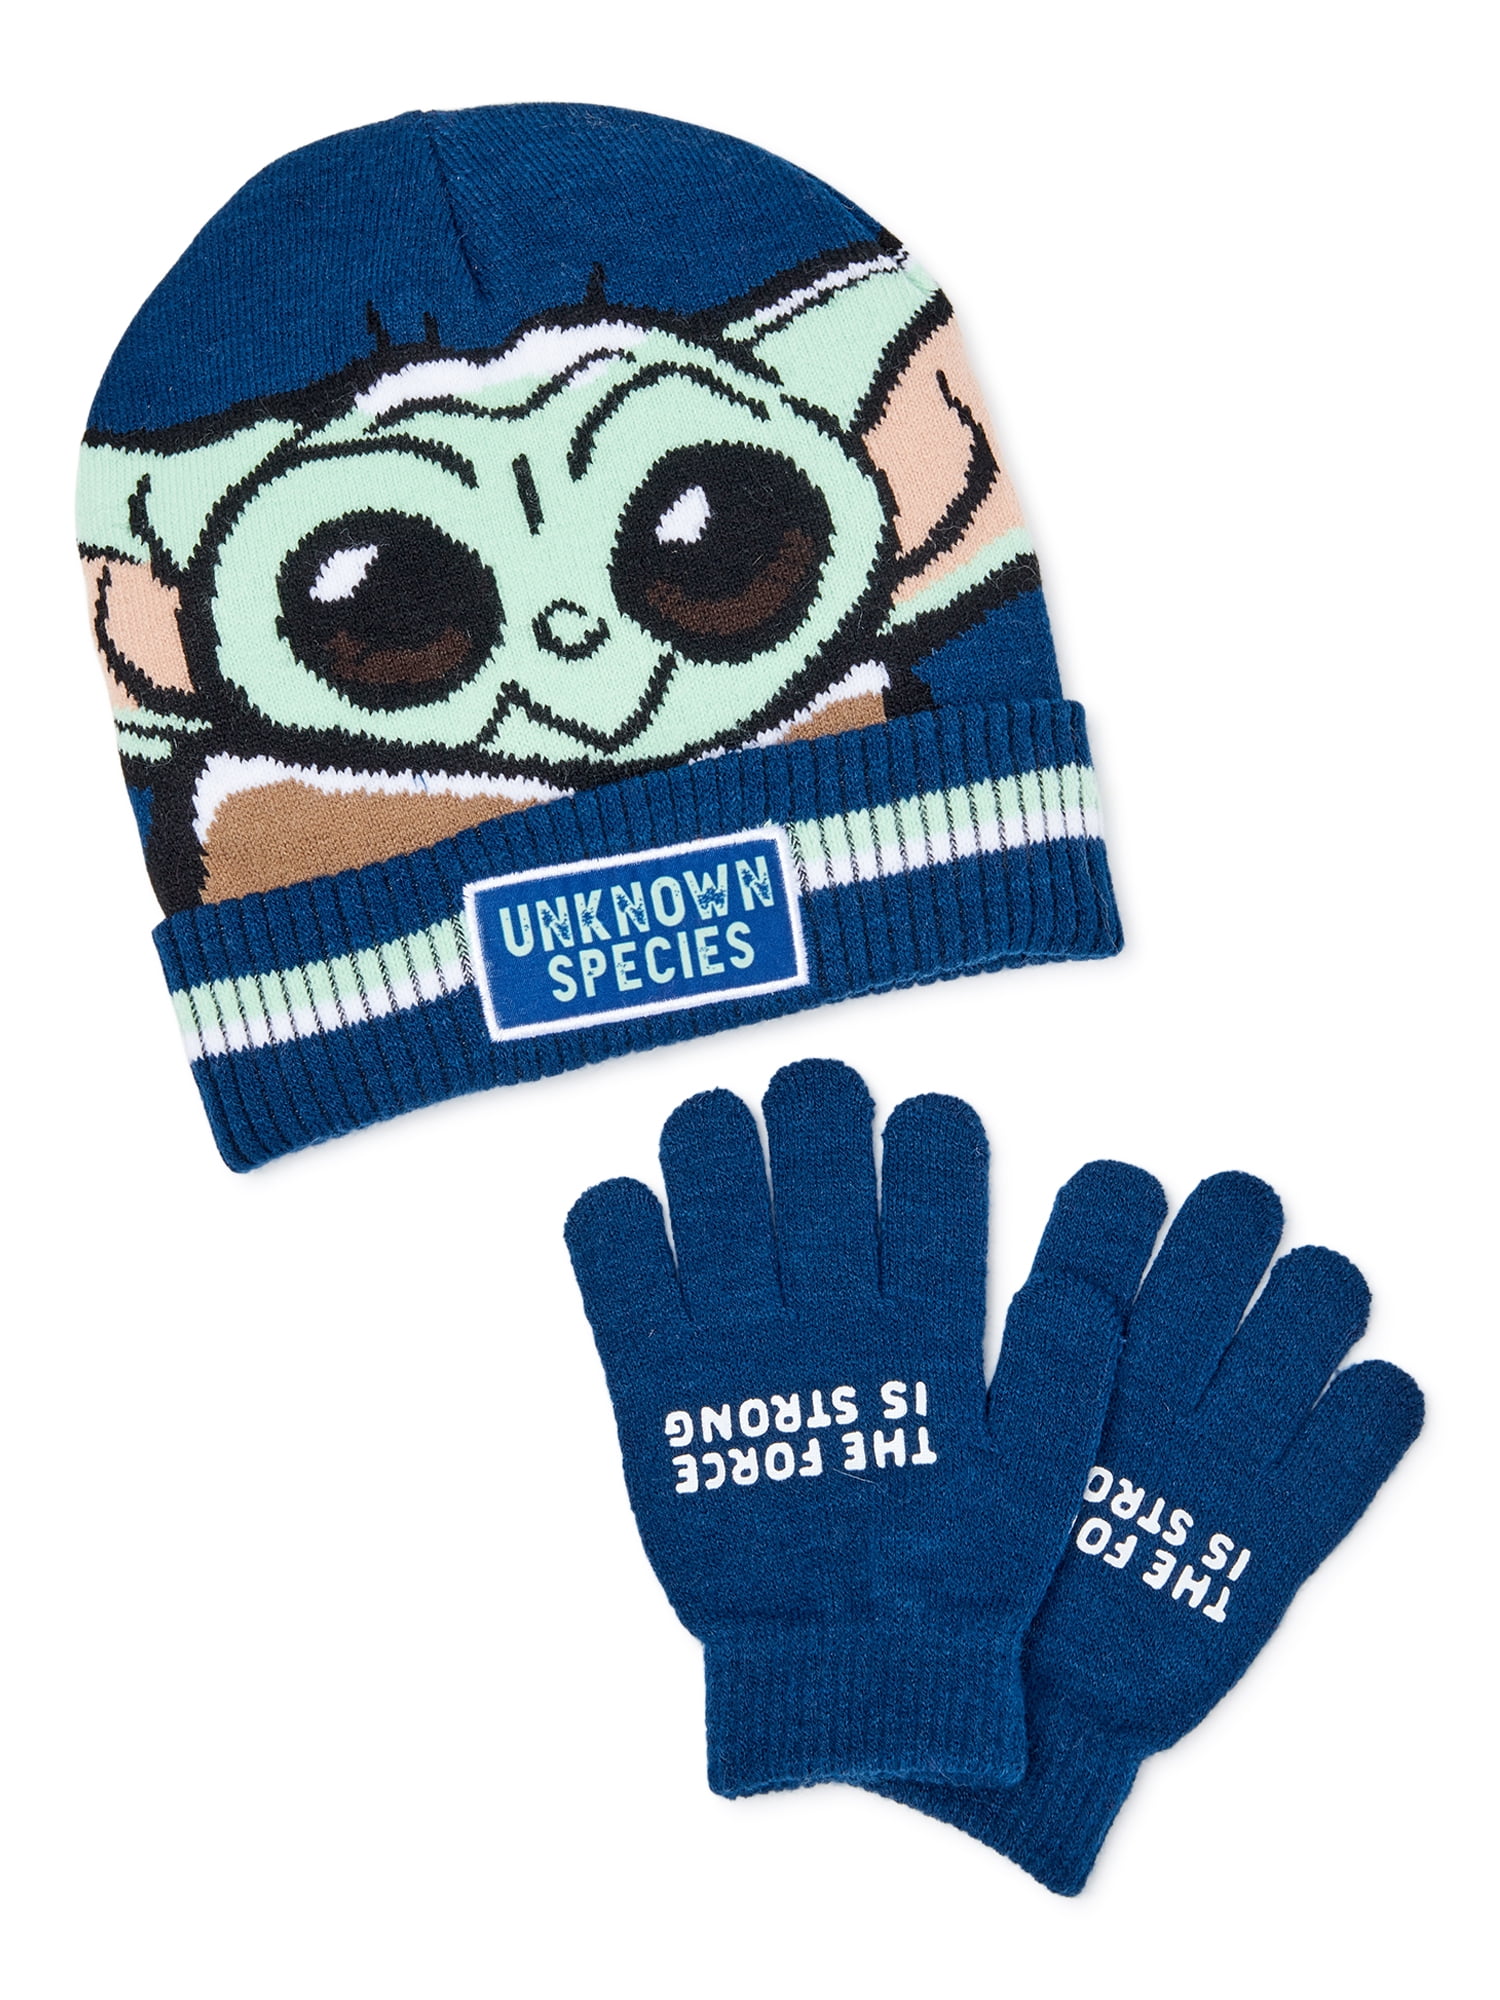 Set Warm Pom-Pom Beanie with Gift Box Star Wars Baby Yoda Kid’s Winter Hat Scarf and Snow Gloves for Boys and Toddlers 3 Pc 